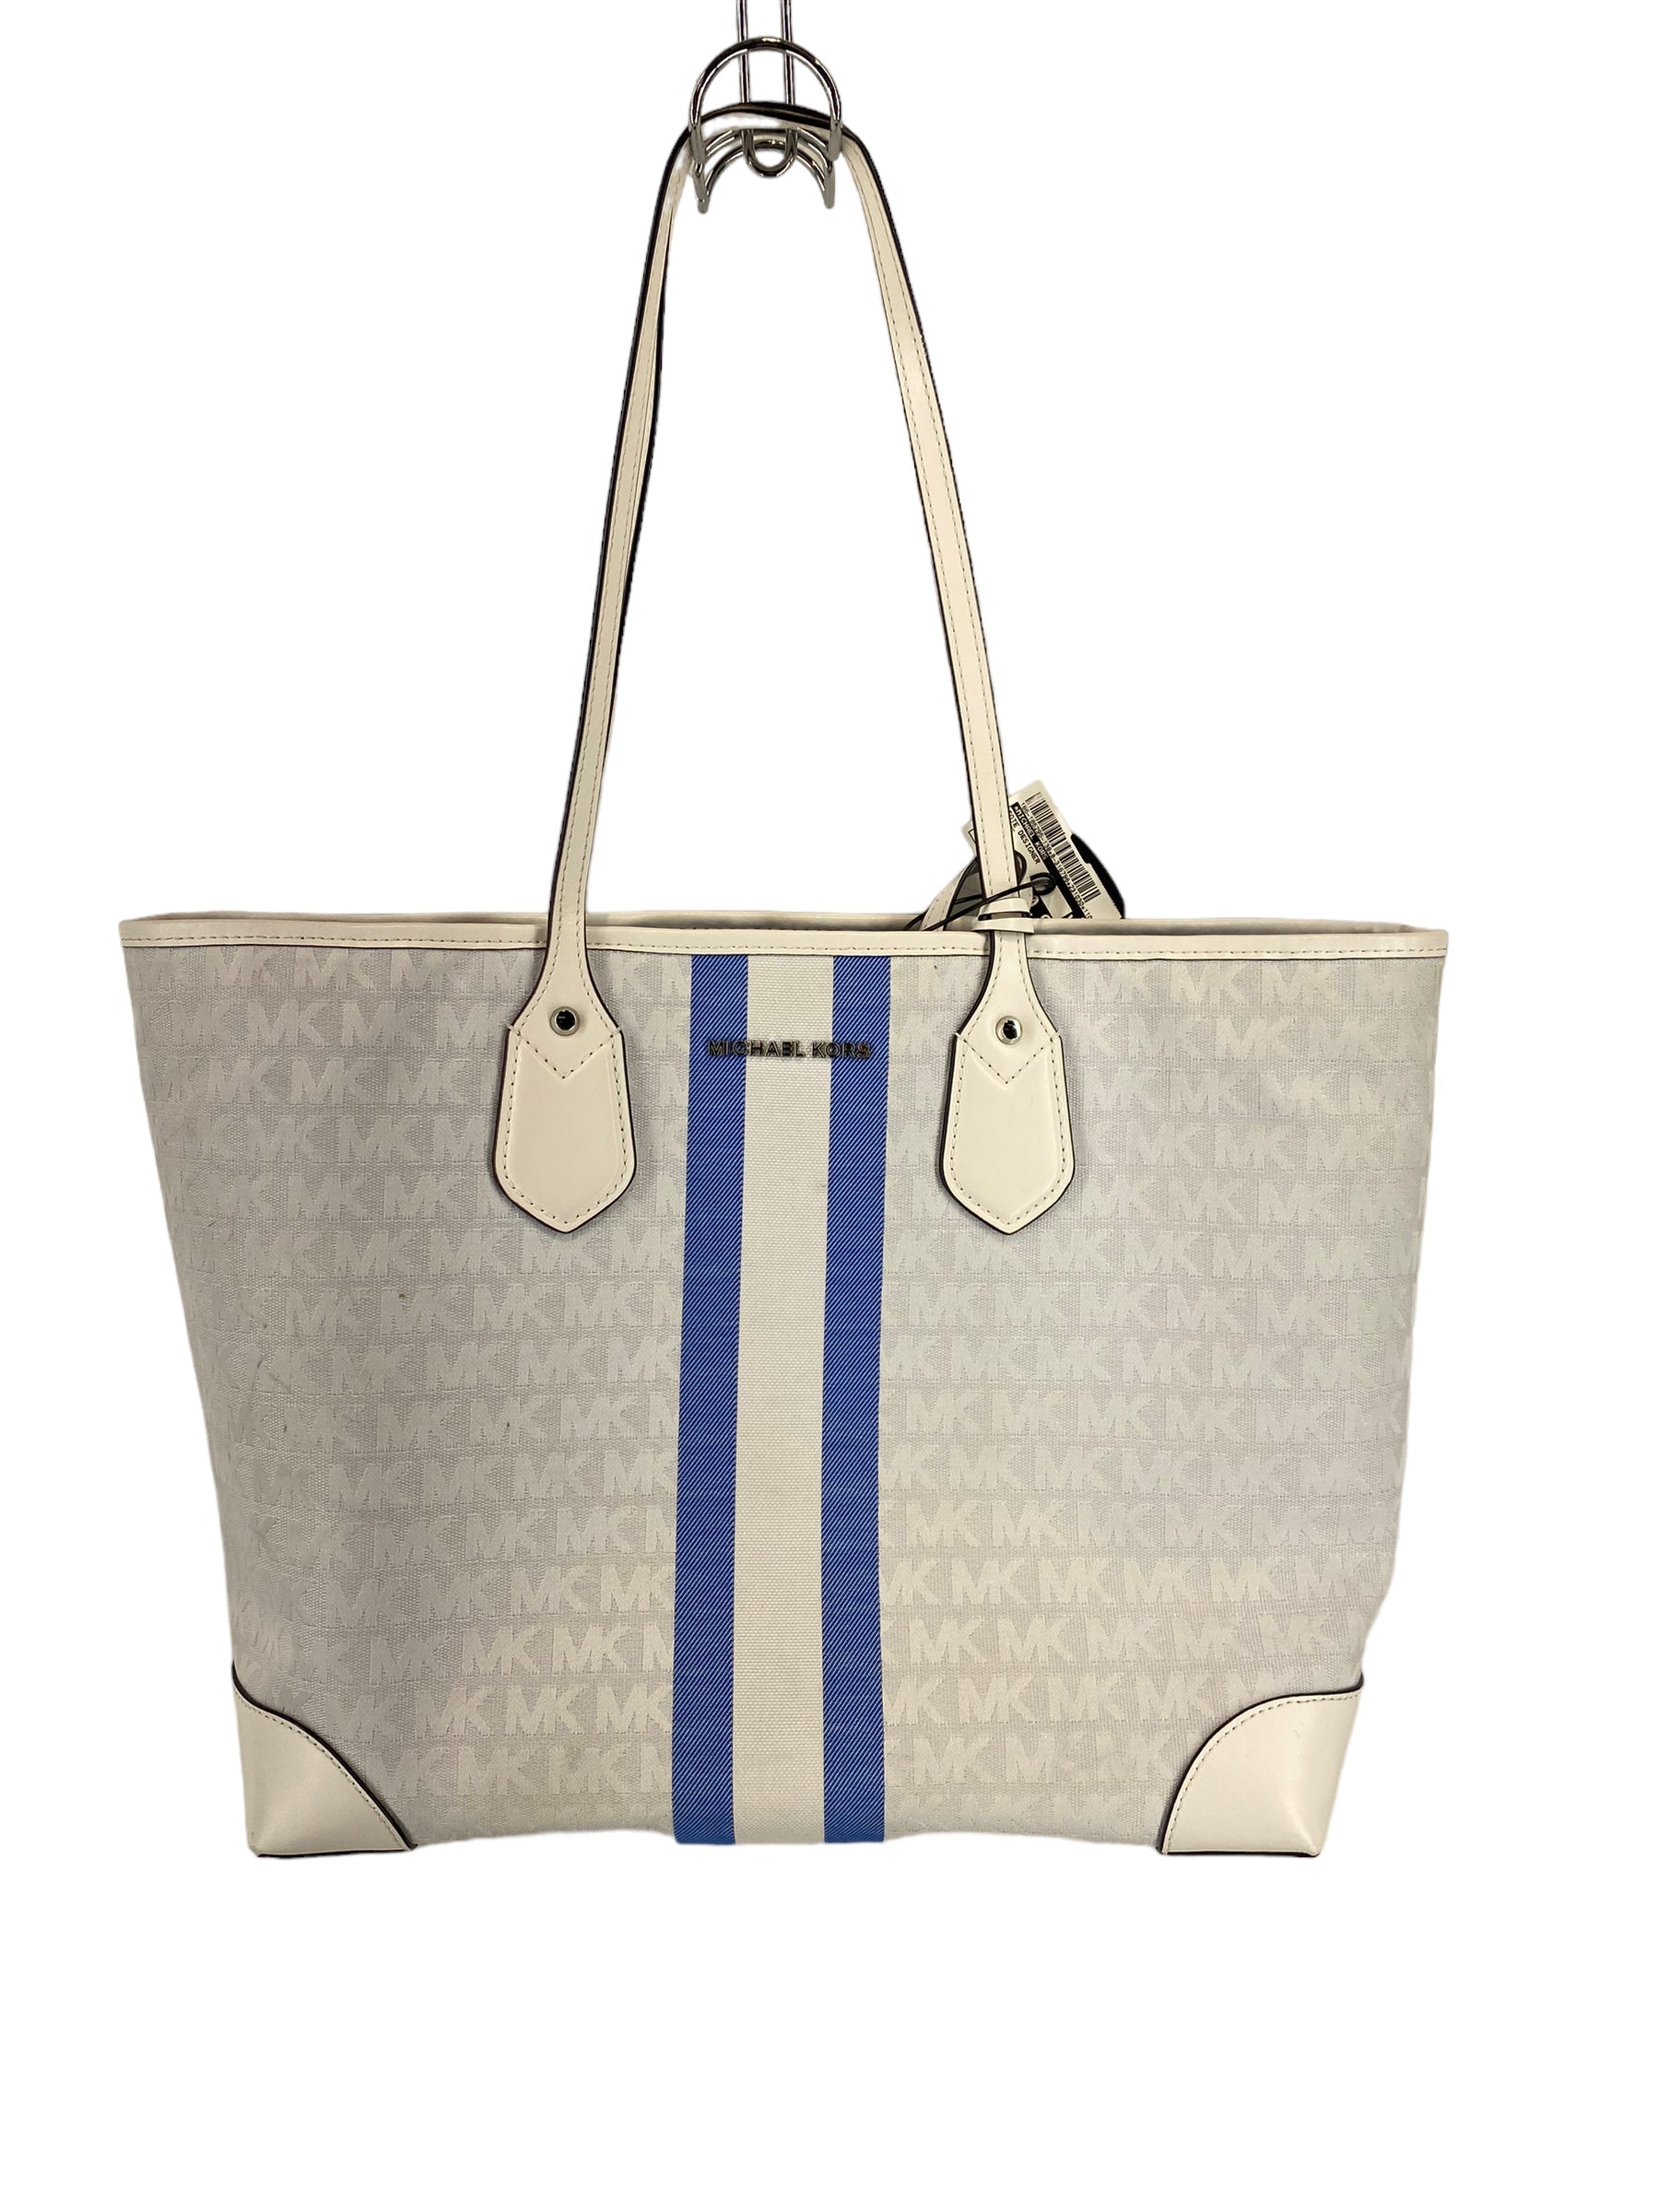 V Tote mm, Grey, One Size